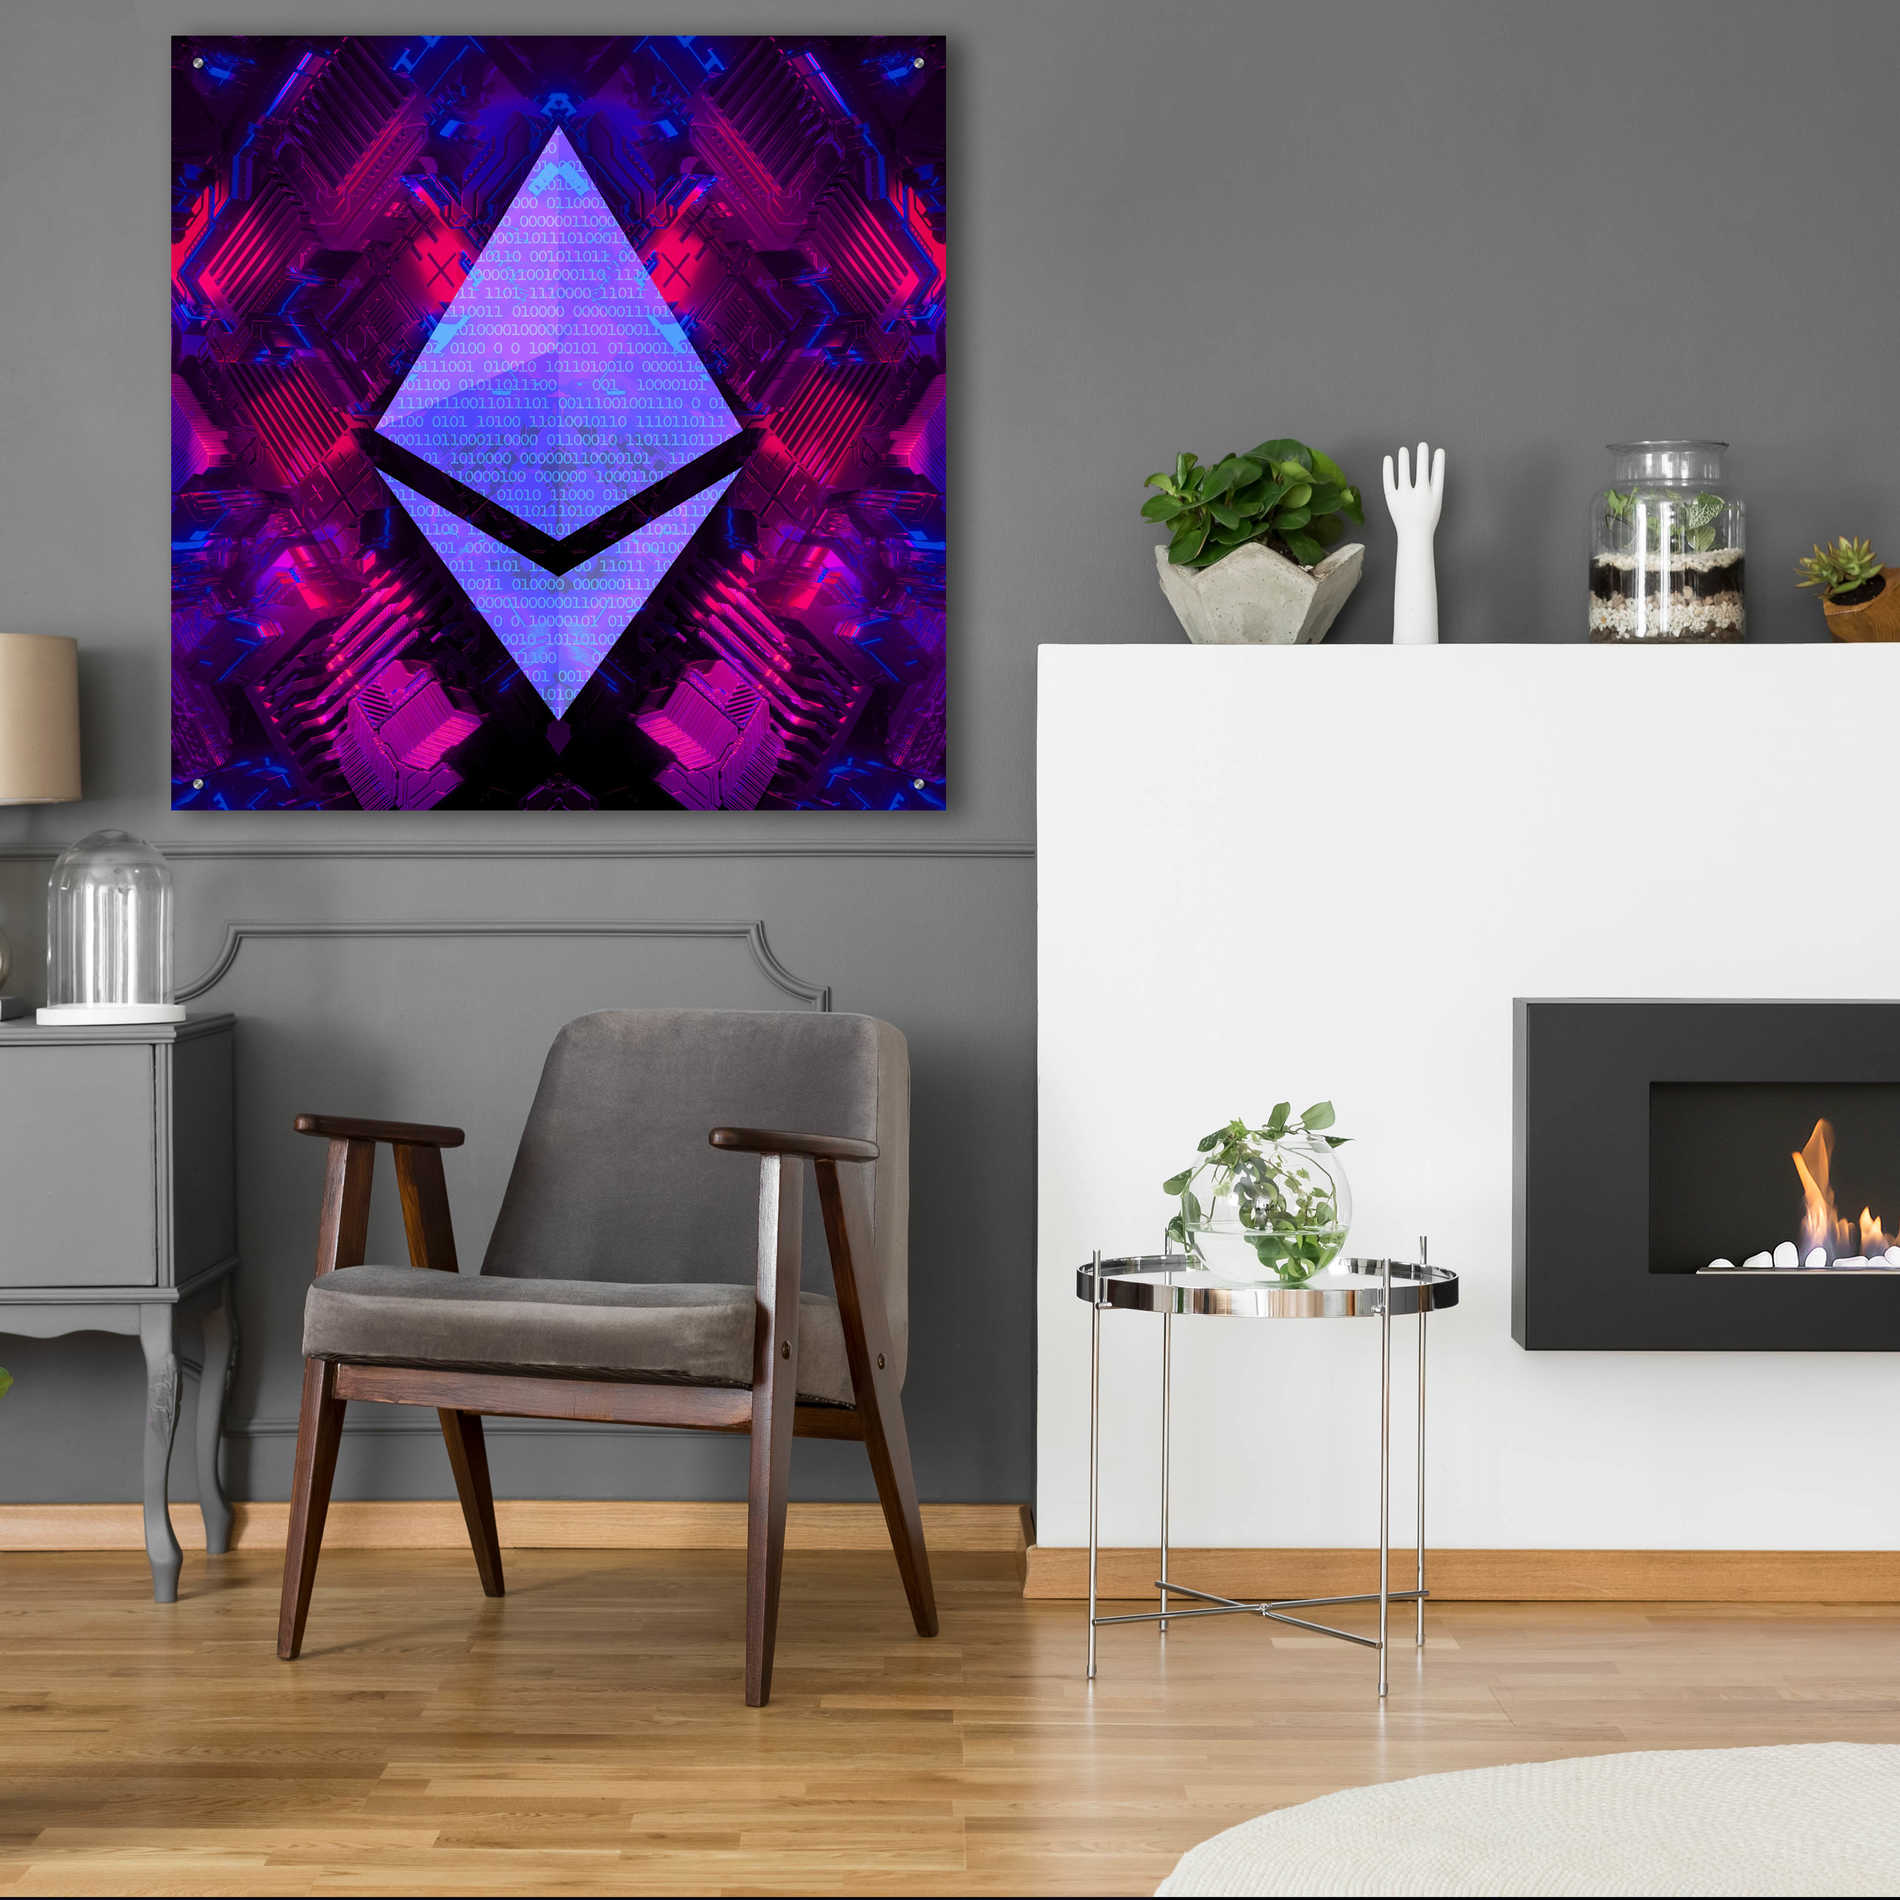 Epic Art 'Ethereum Future' by Cameron Gray Acrylic Glass Wall Art,36x36